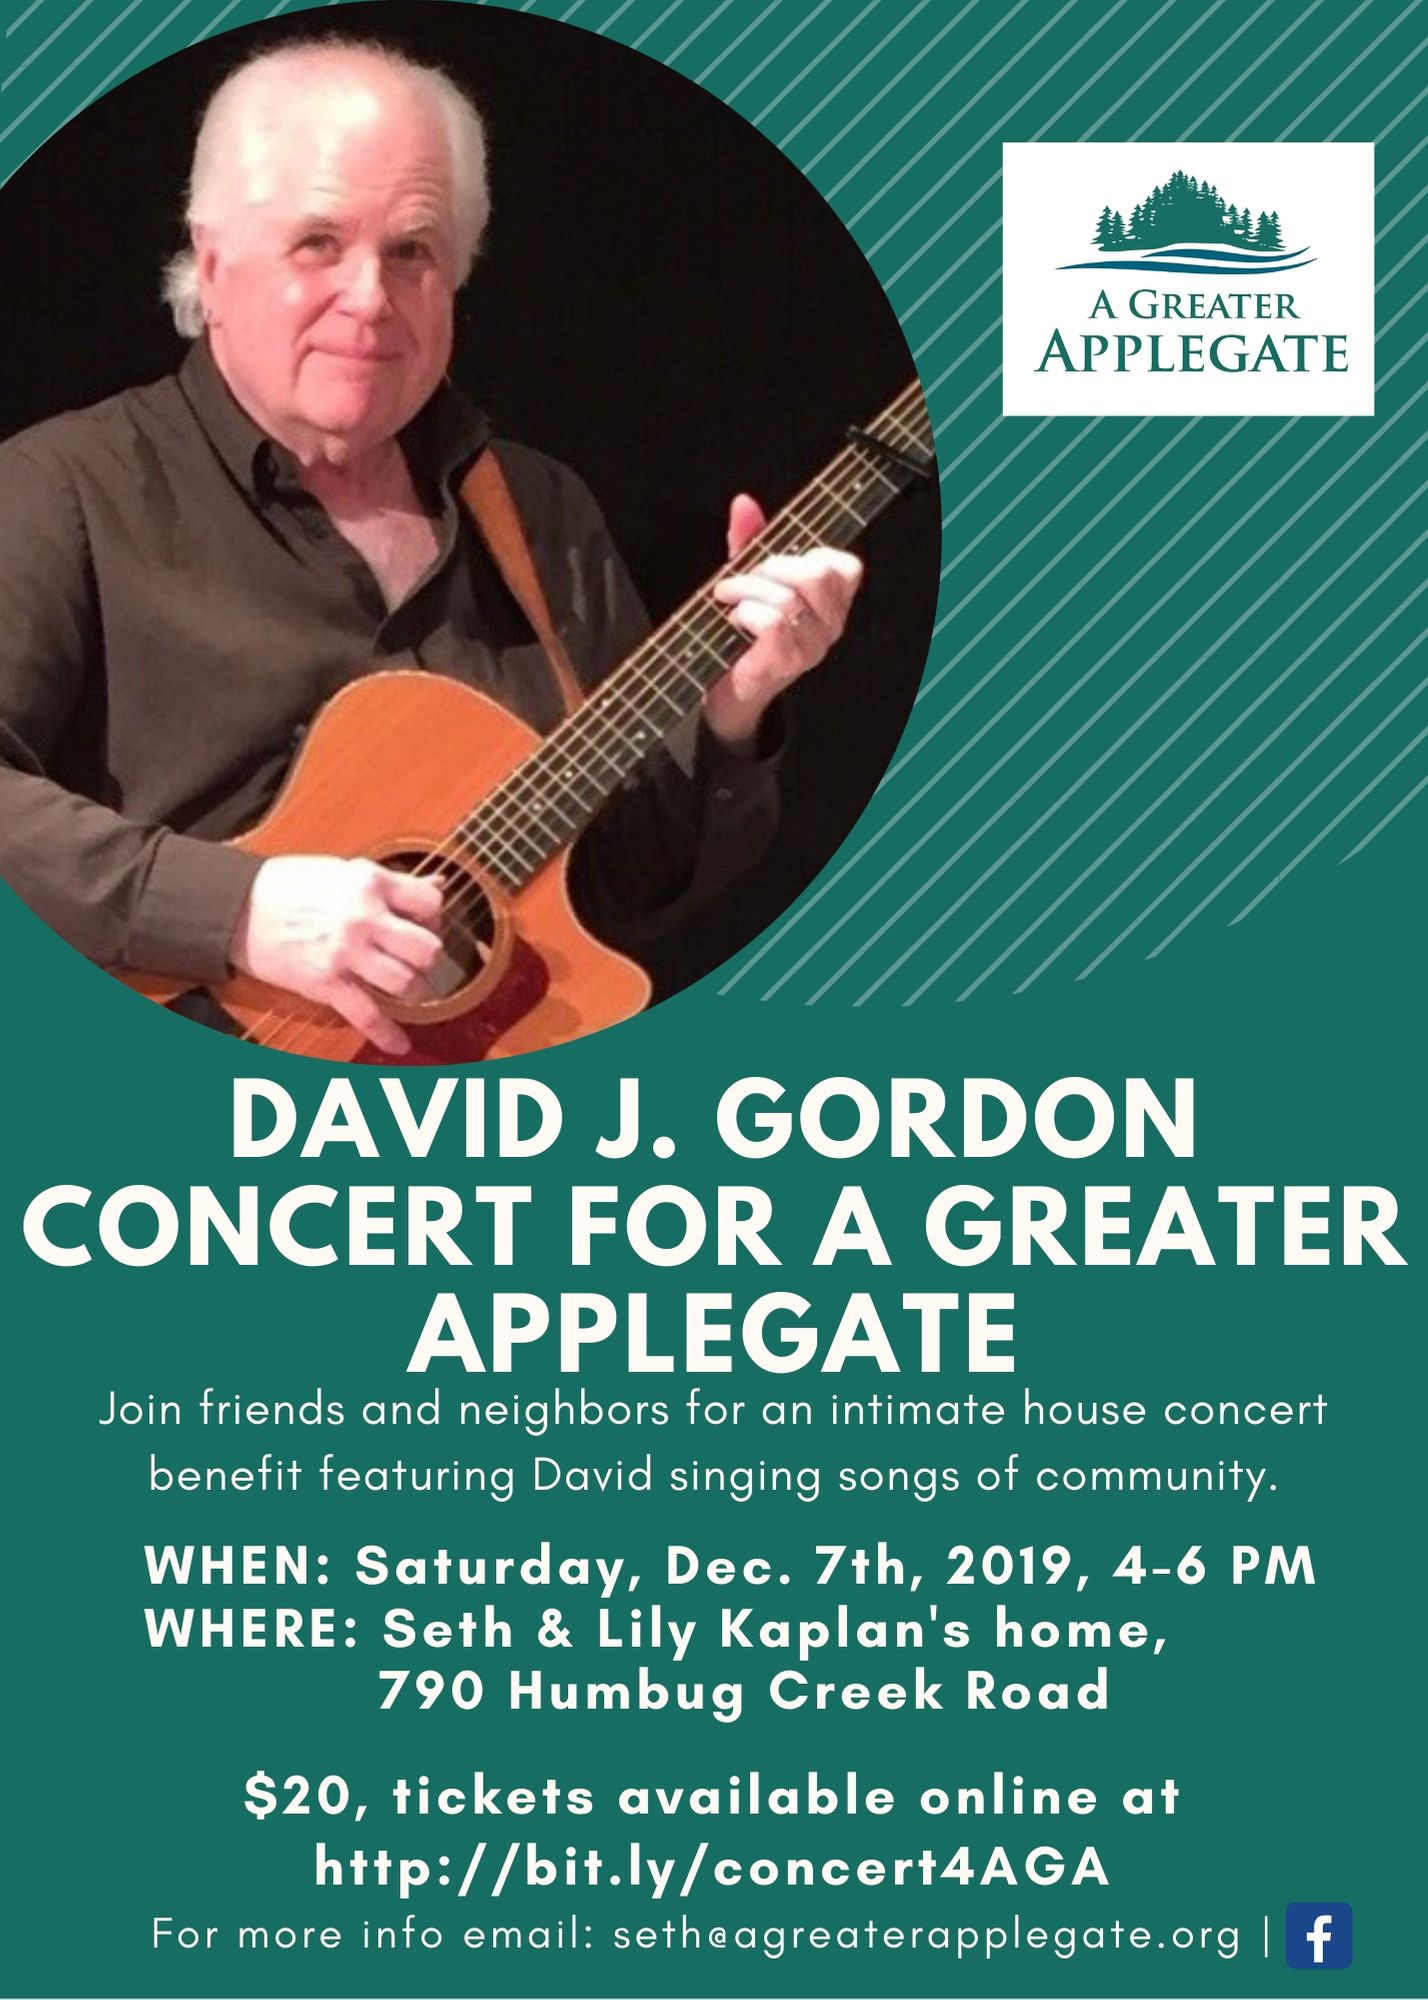 A Greater Applegate Brings Internationally Acclaimed Musician David J. Gordon to the Applegate Valley for an Intimate House Concert Benefit Event